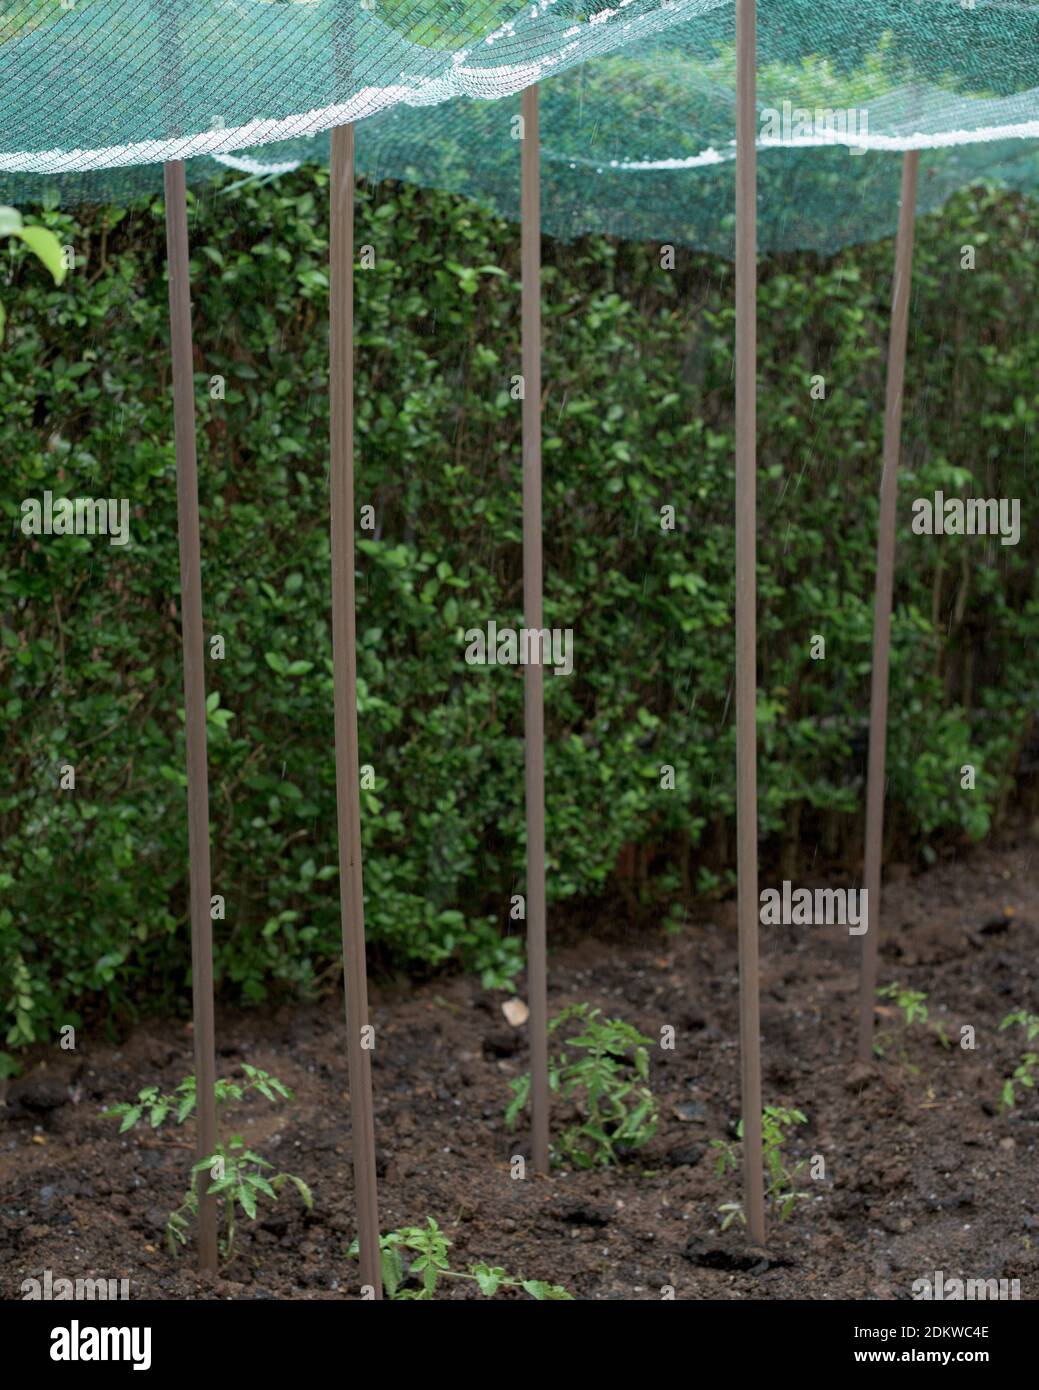 Storm of hail in a vegetable garden and protection net Stock Photo